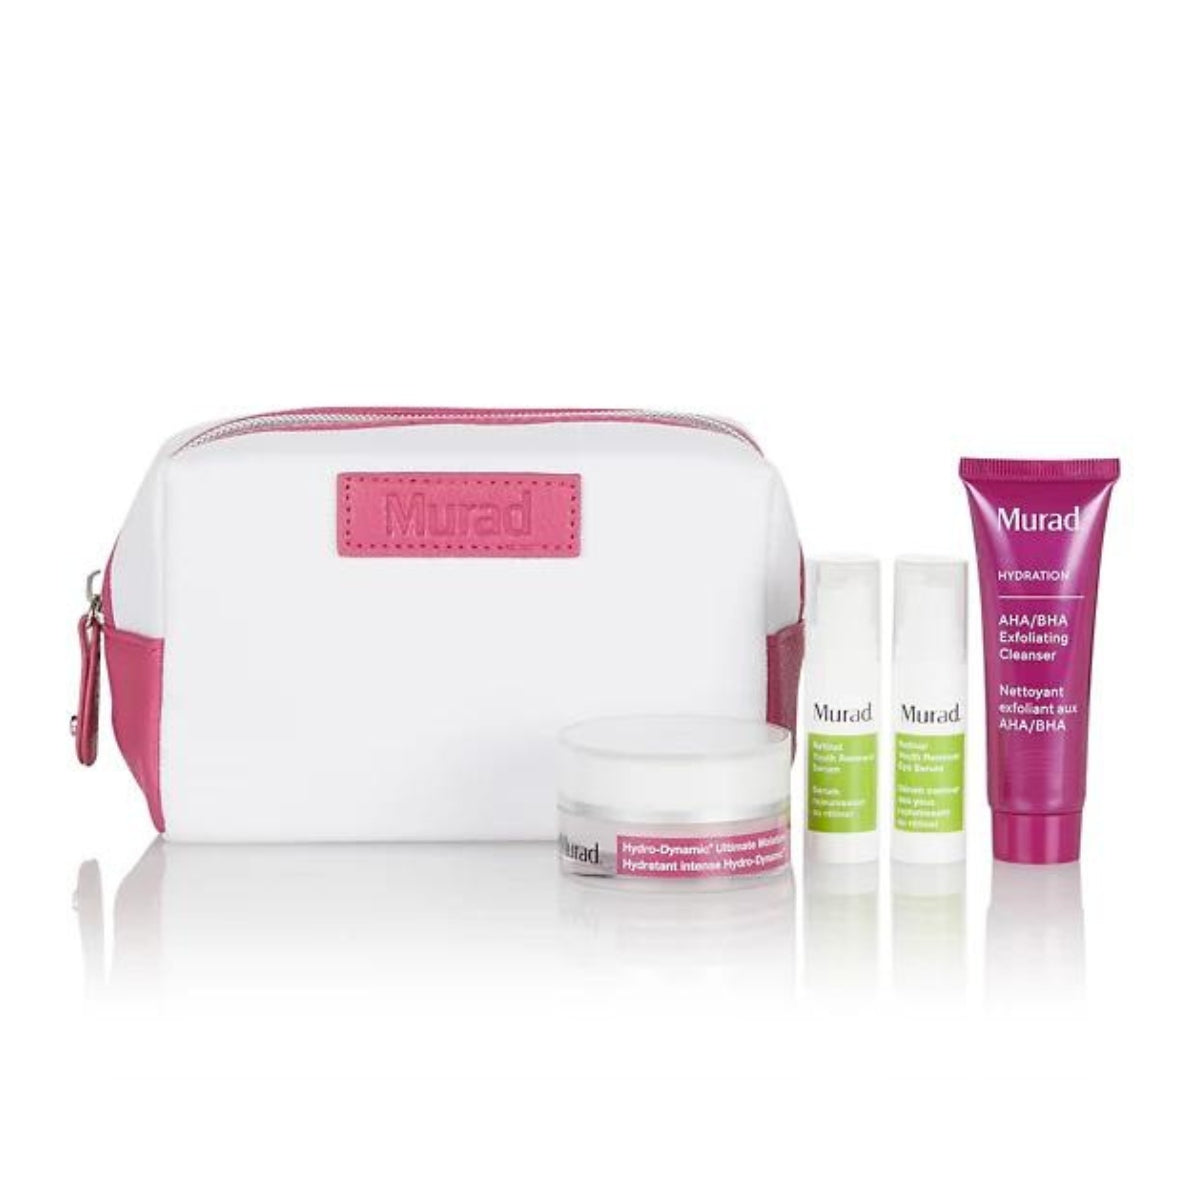 🎁 Free Murad Firm & Radiant Travel Set (worth €30) when you buy 2 or more Murad Products. One Gift per Person. While Stock Lasts. (100% off)